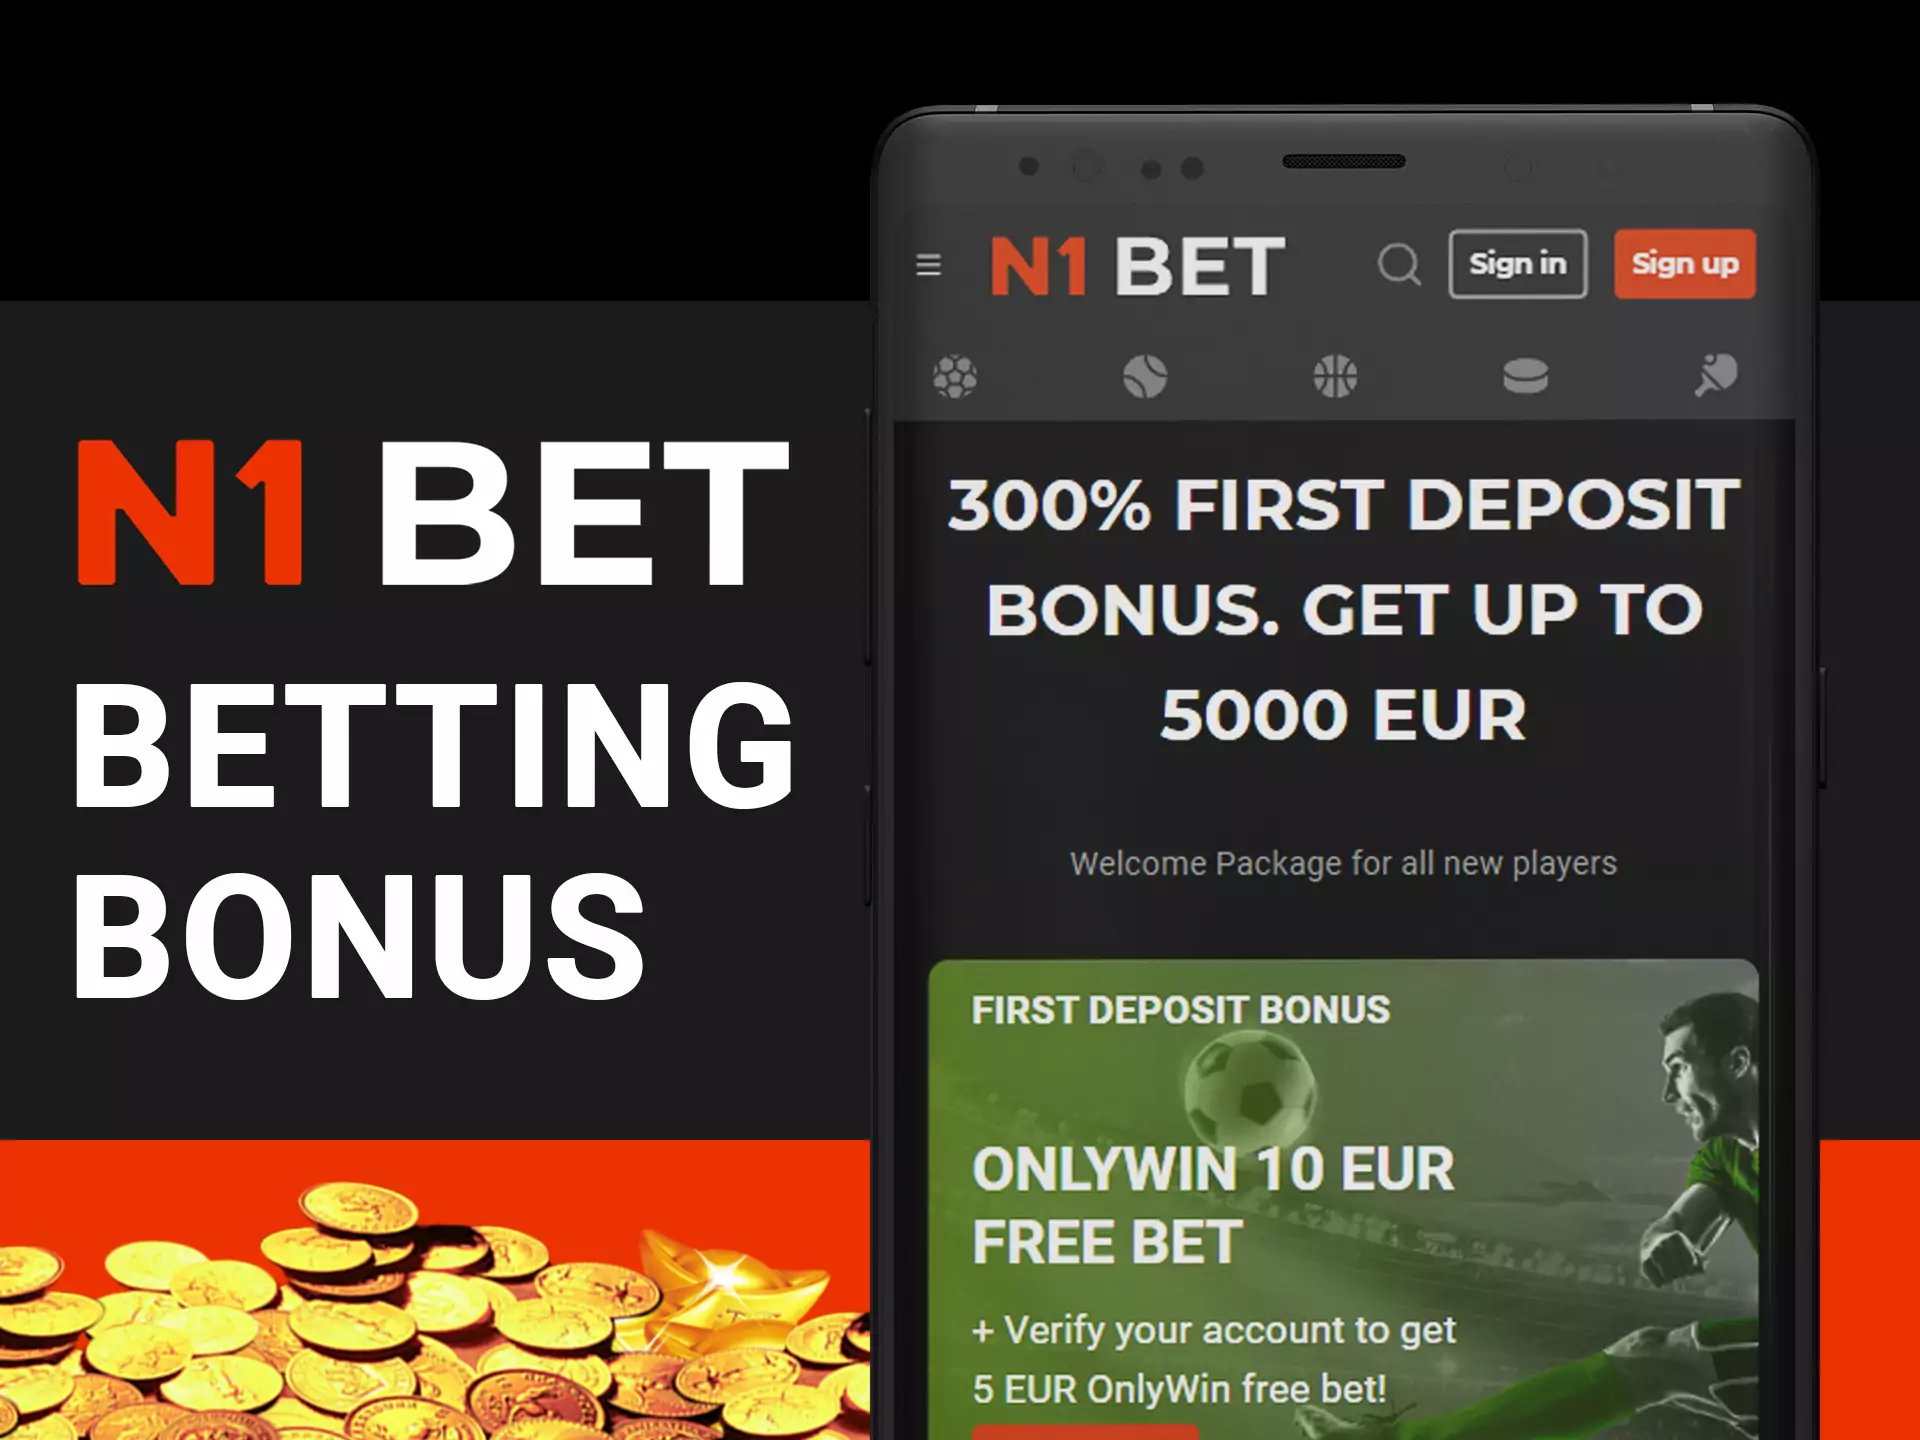 Recieve bonuses for betting with N1Bet app.